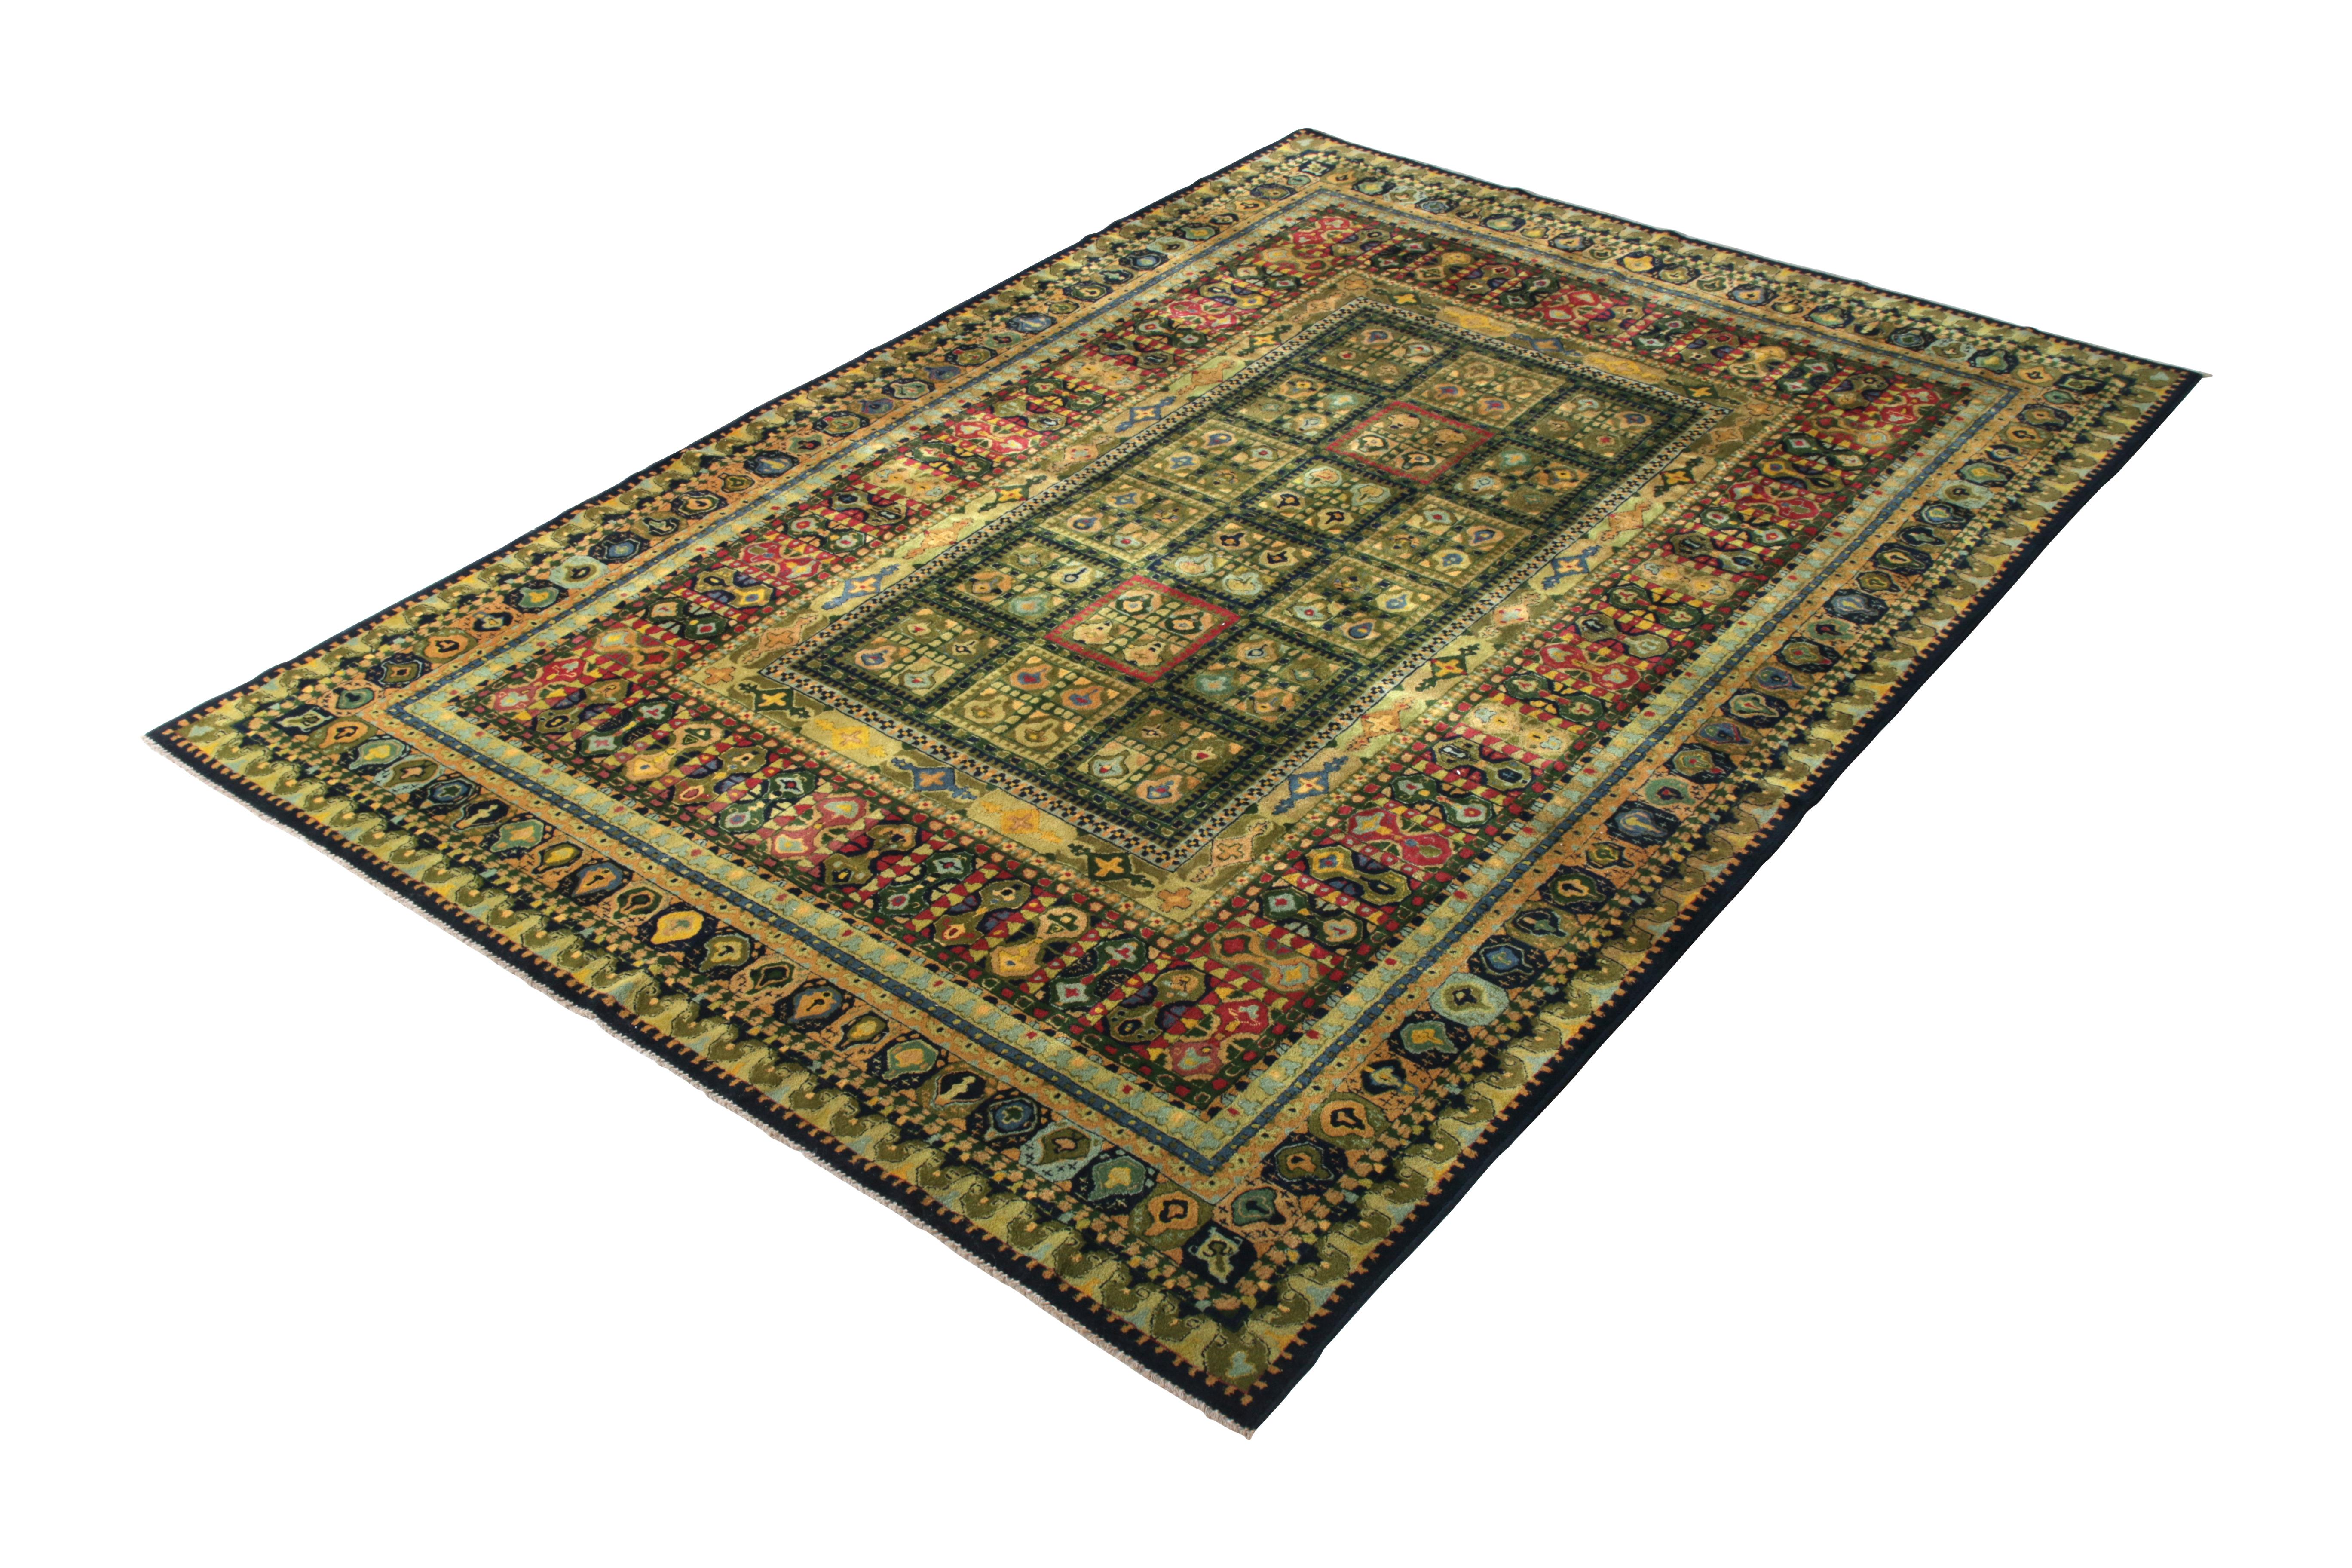 Hand knotted in wool originating from Turkey circa 1950-1960, this vintage rug connotes one of the most distinctive, rare mid-century Turkish rug designs to join our antique and vintage collection, further boasting a unique prevailing green colorway